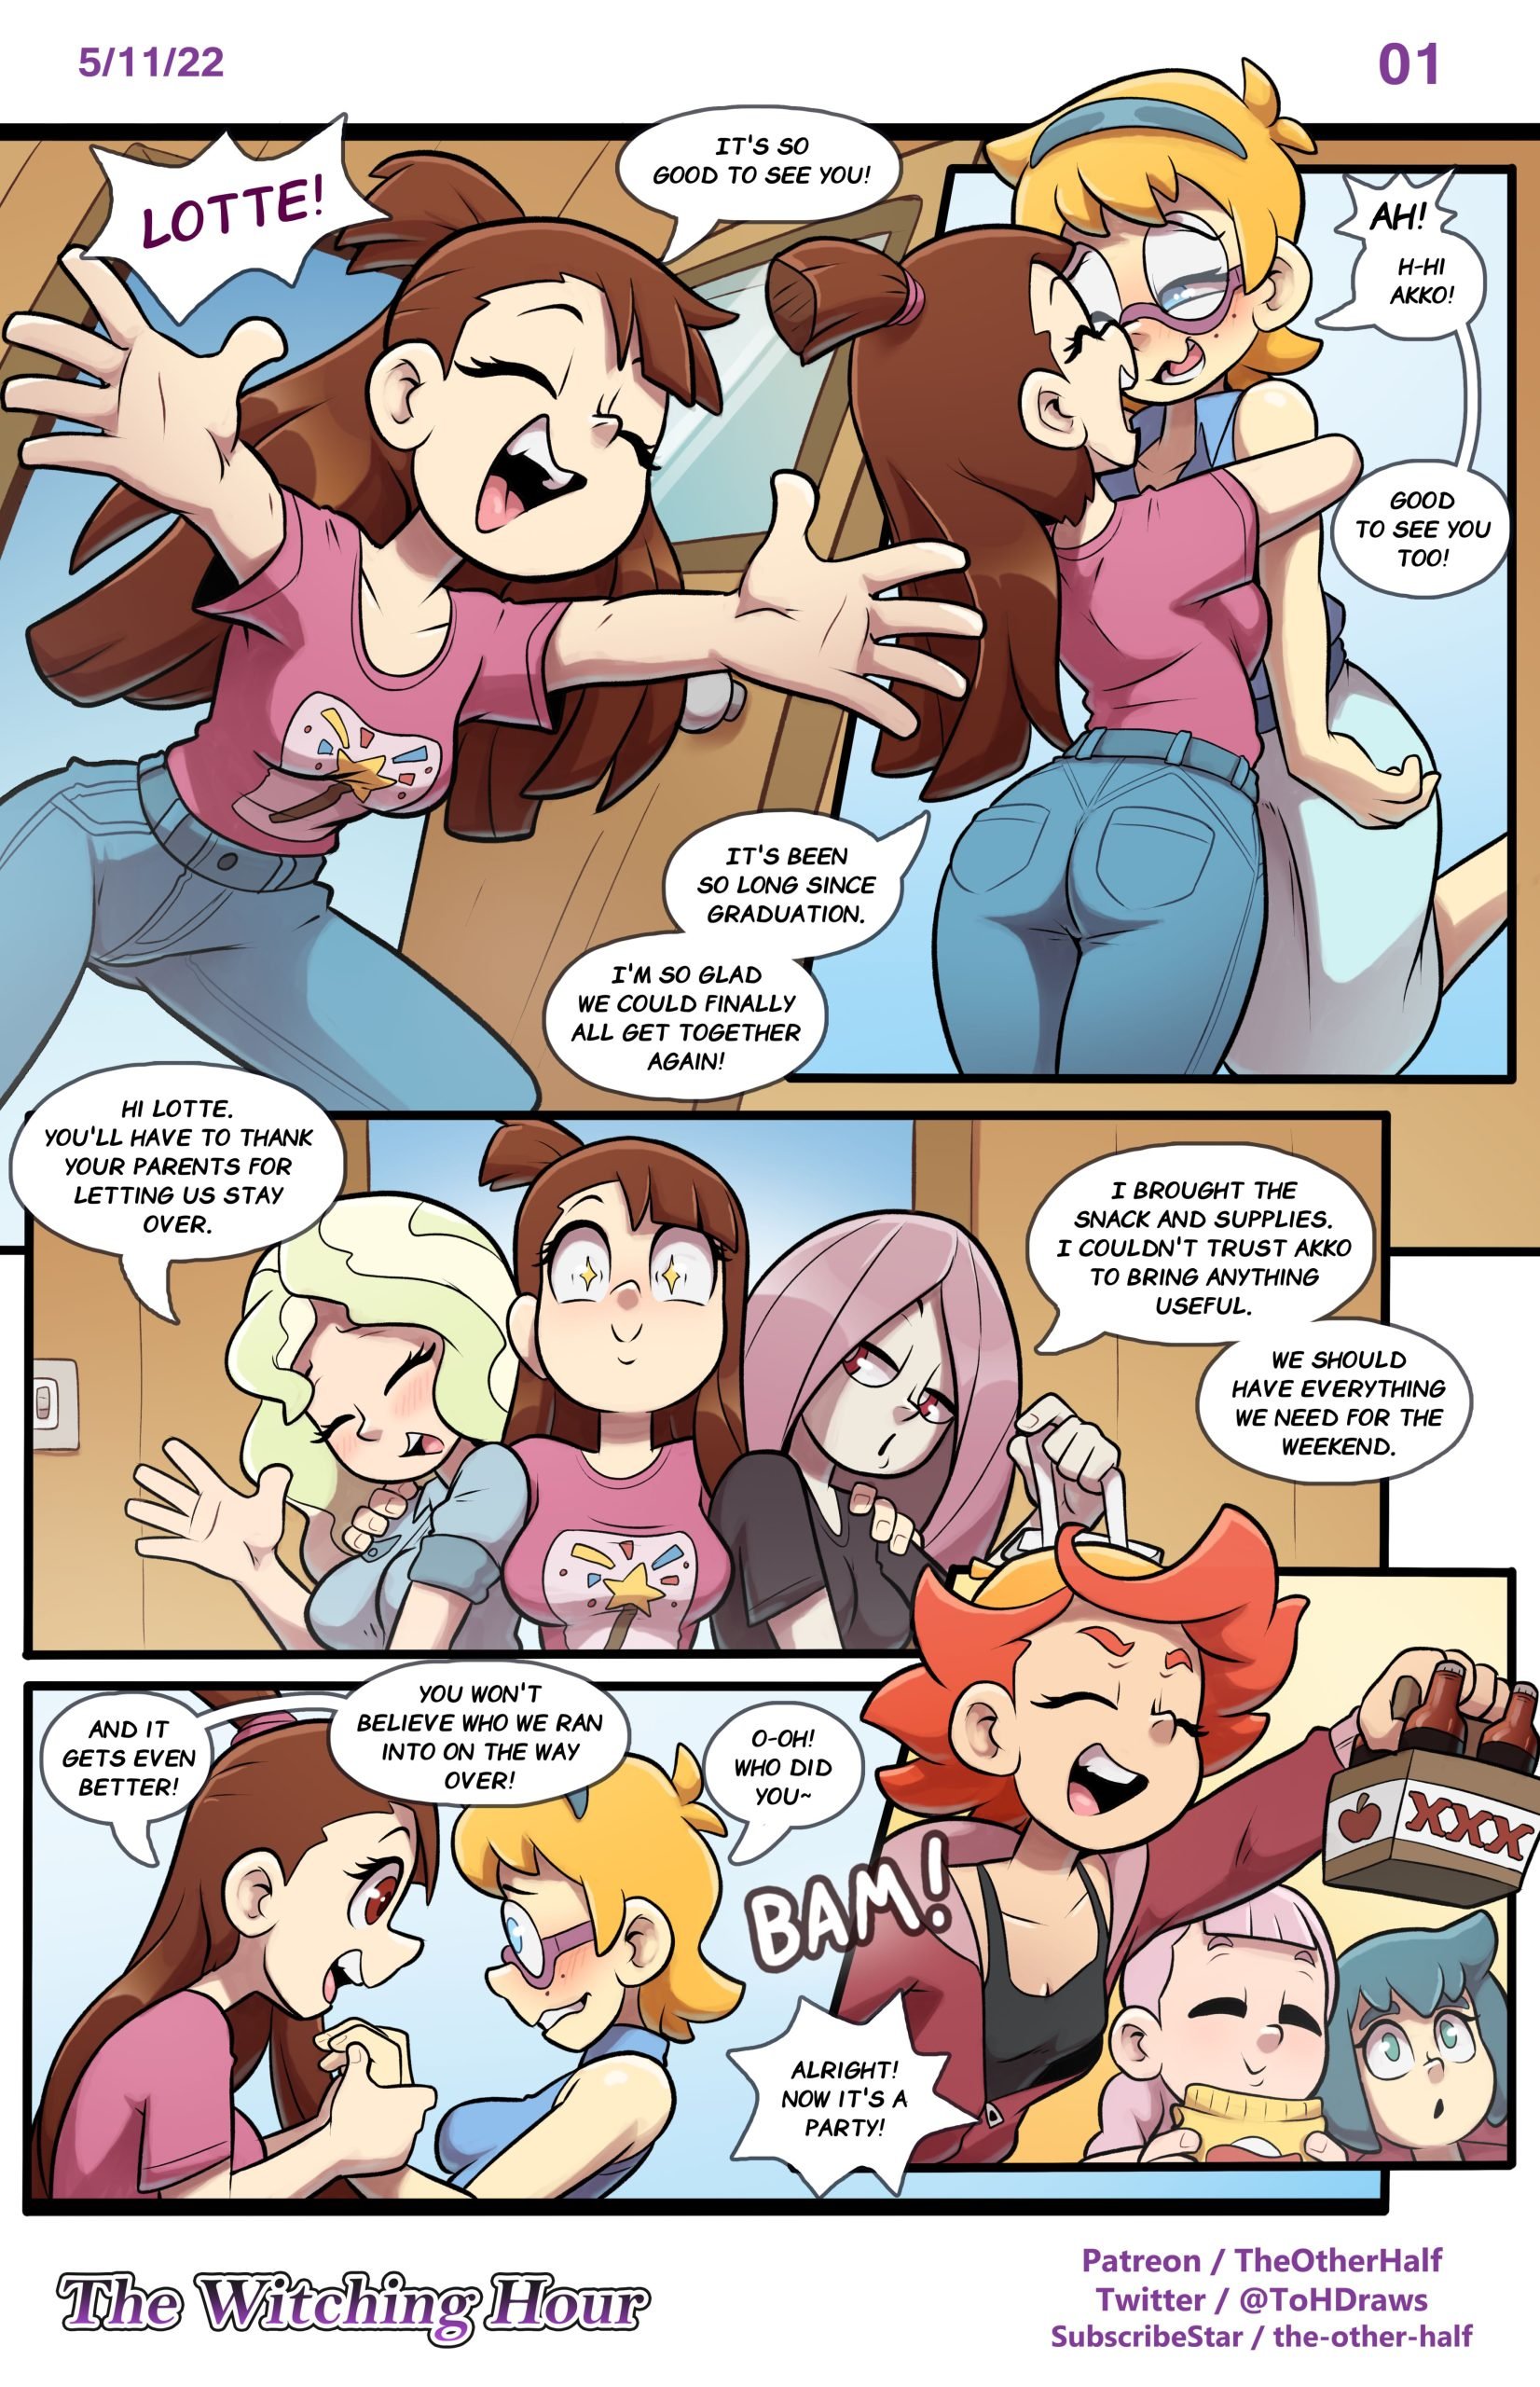 The Witching Hour (Little Witch Academia) TheOtherHalf Porn Comic picture